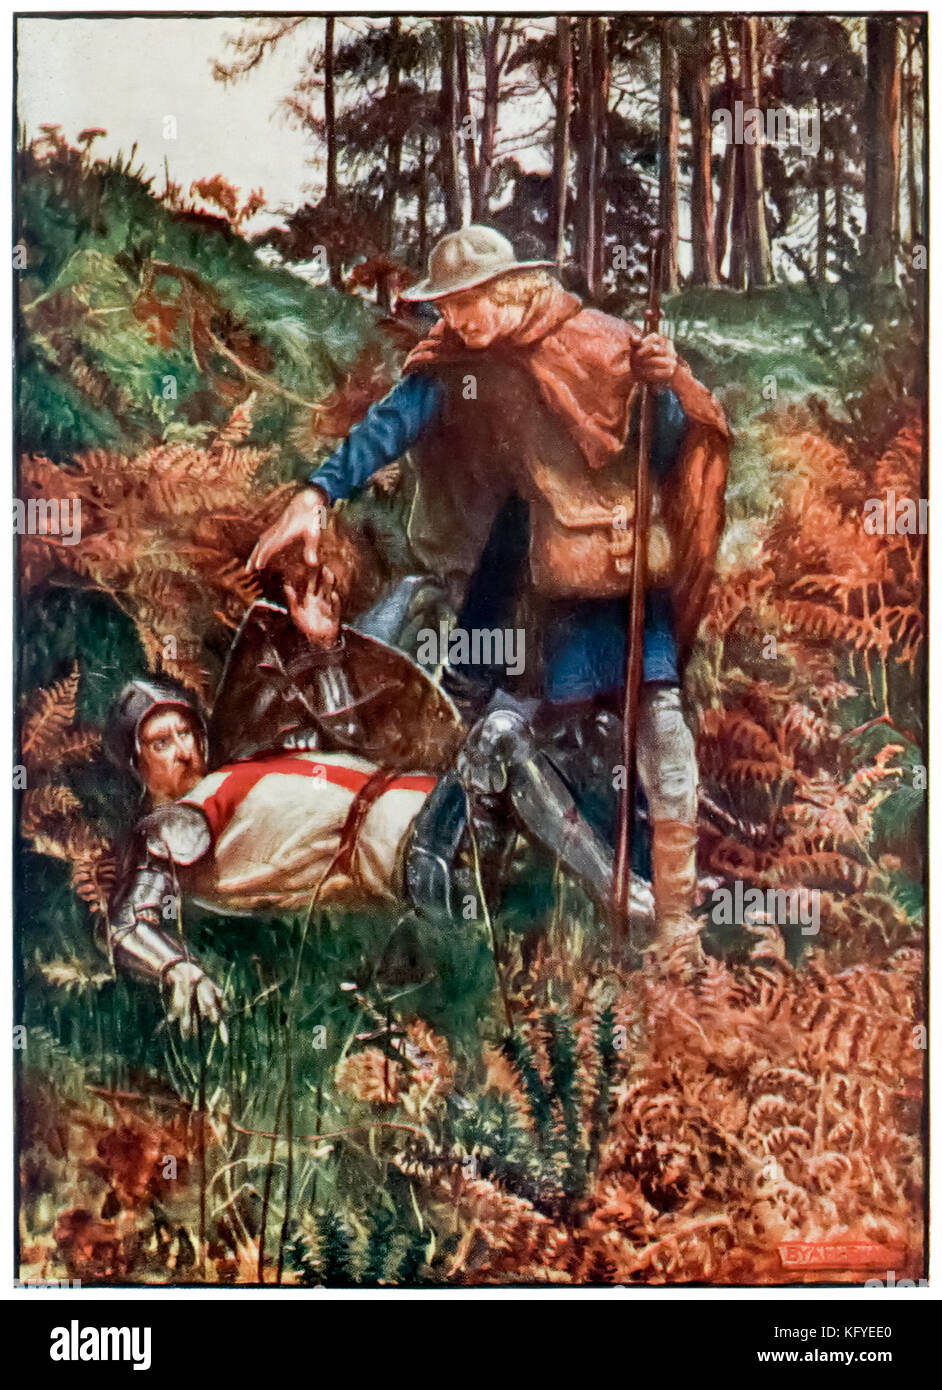 “Faithful helps Christian up after his fall” from ‘The Pilgrim’s Progress From This World, To That Which Is To Come’ by John Bunyan (1628-1688). Illustration by Byam Shaw (1872-1919) showing Christian being helped to his feet by a fellow pilgrim, Faithful. See more information below. Stock Photo